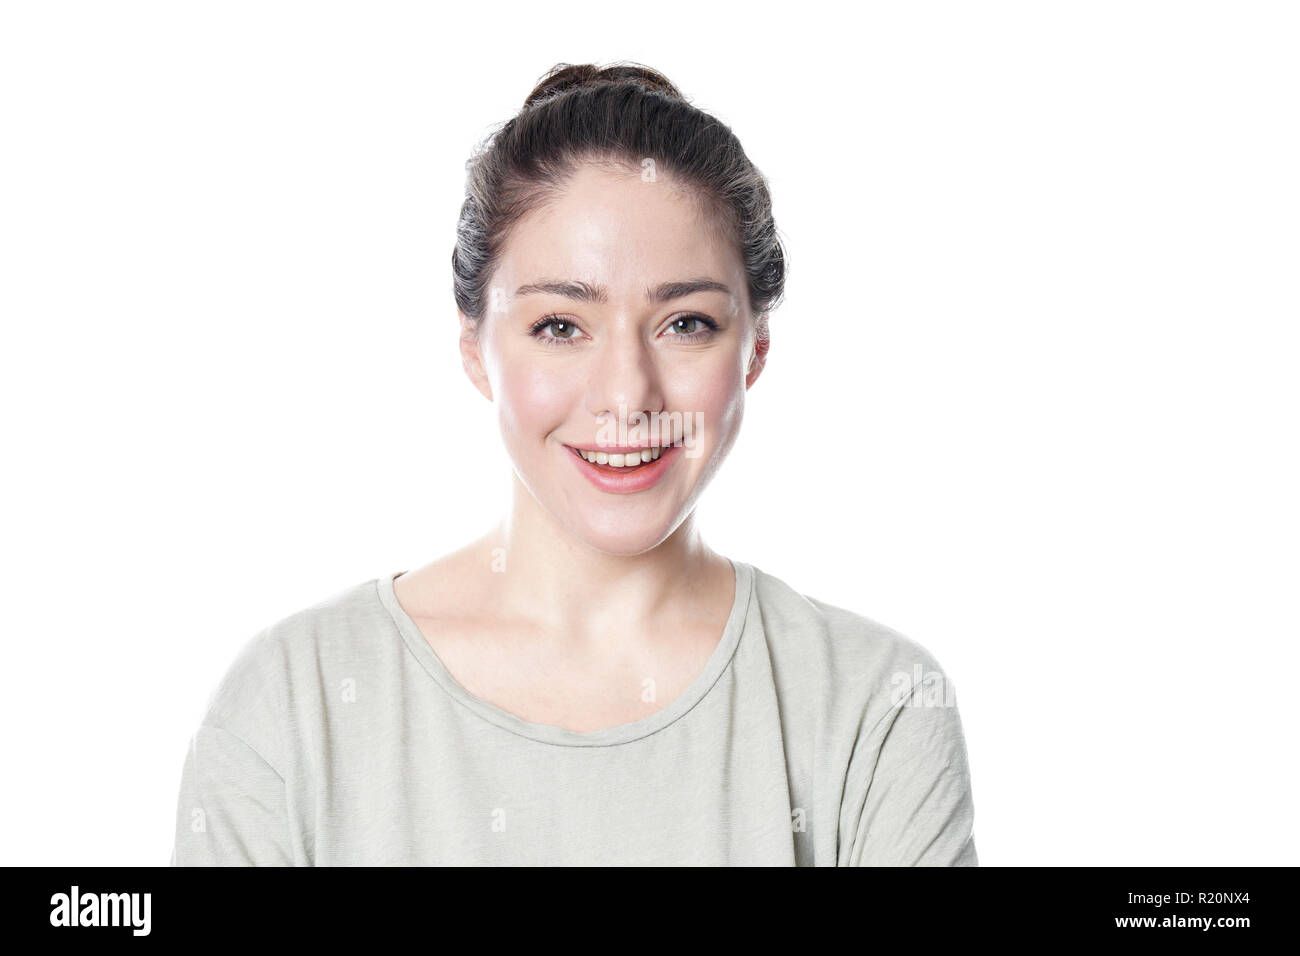 cheerful young woman in her 20s smiling Stock Photo